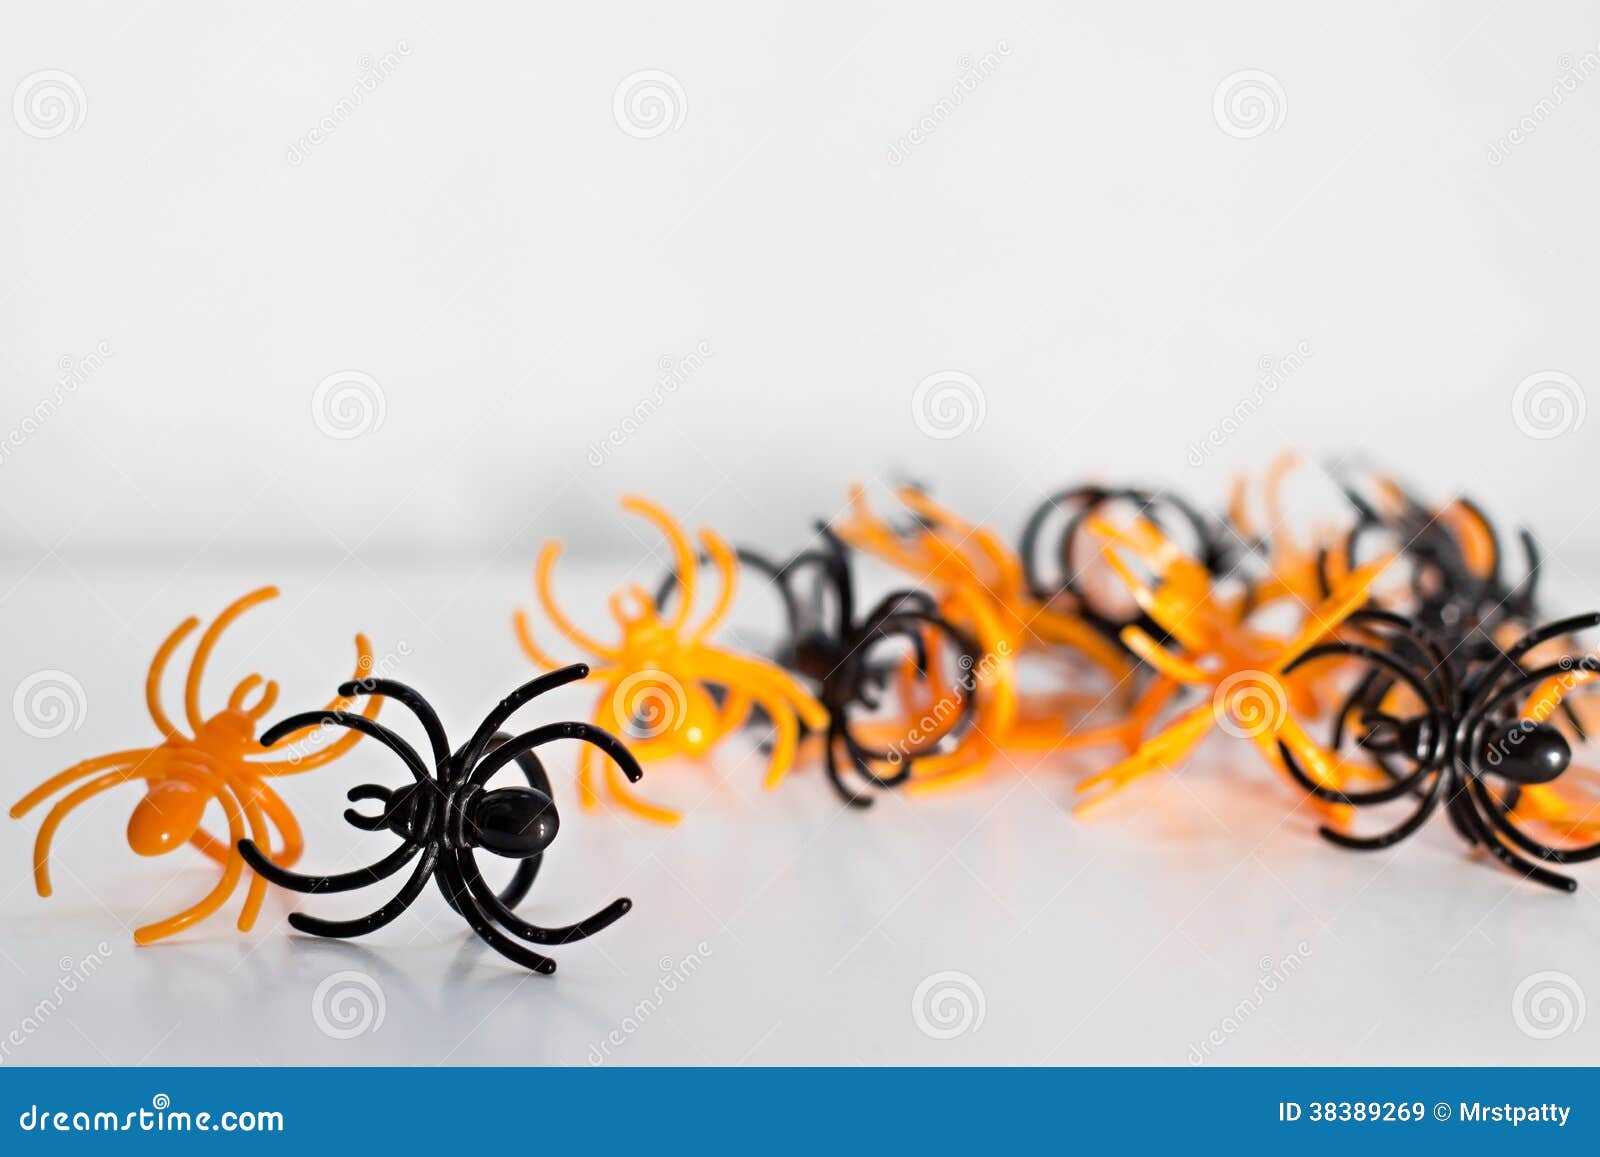 Plastic Toy Spider Rings Royalty Free Stock Images Image